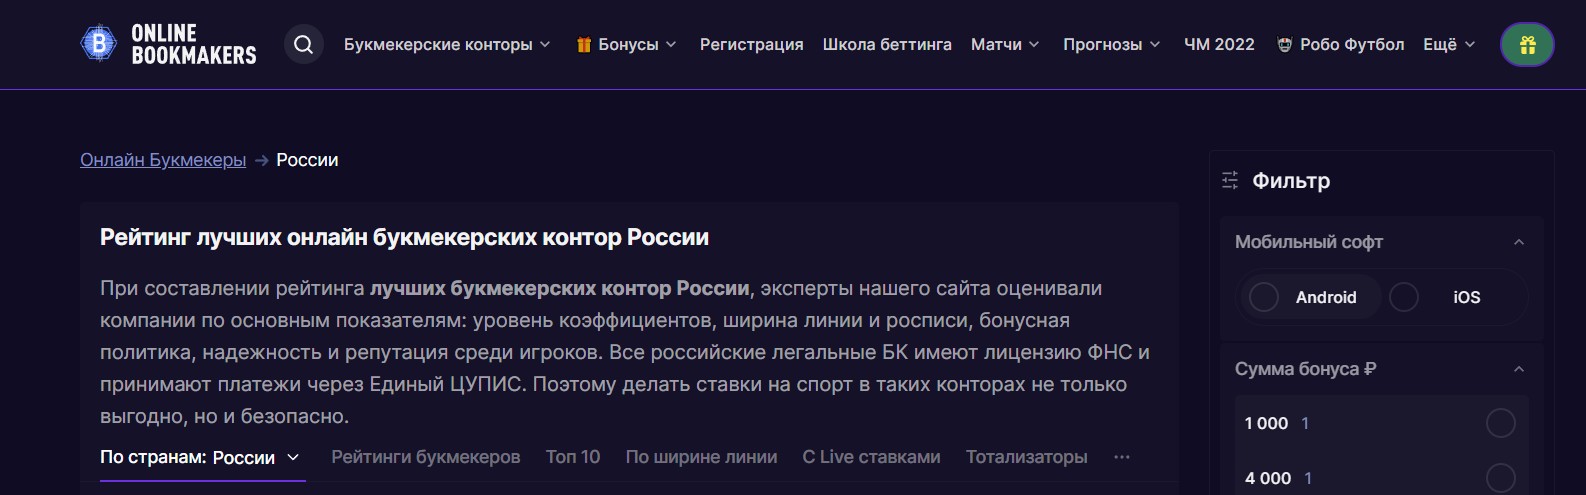 ÐžÑ„Ð¸Ñ†Ð¸Ð°Ð»ÑŒÐ½Ñ‹Ð¹ Ñ�Ð°Ð¹Ñ‚ Online-bookmakers